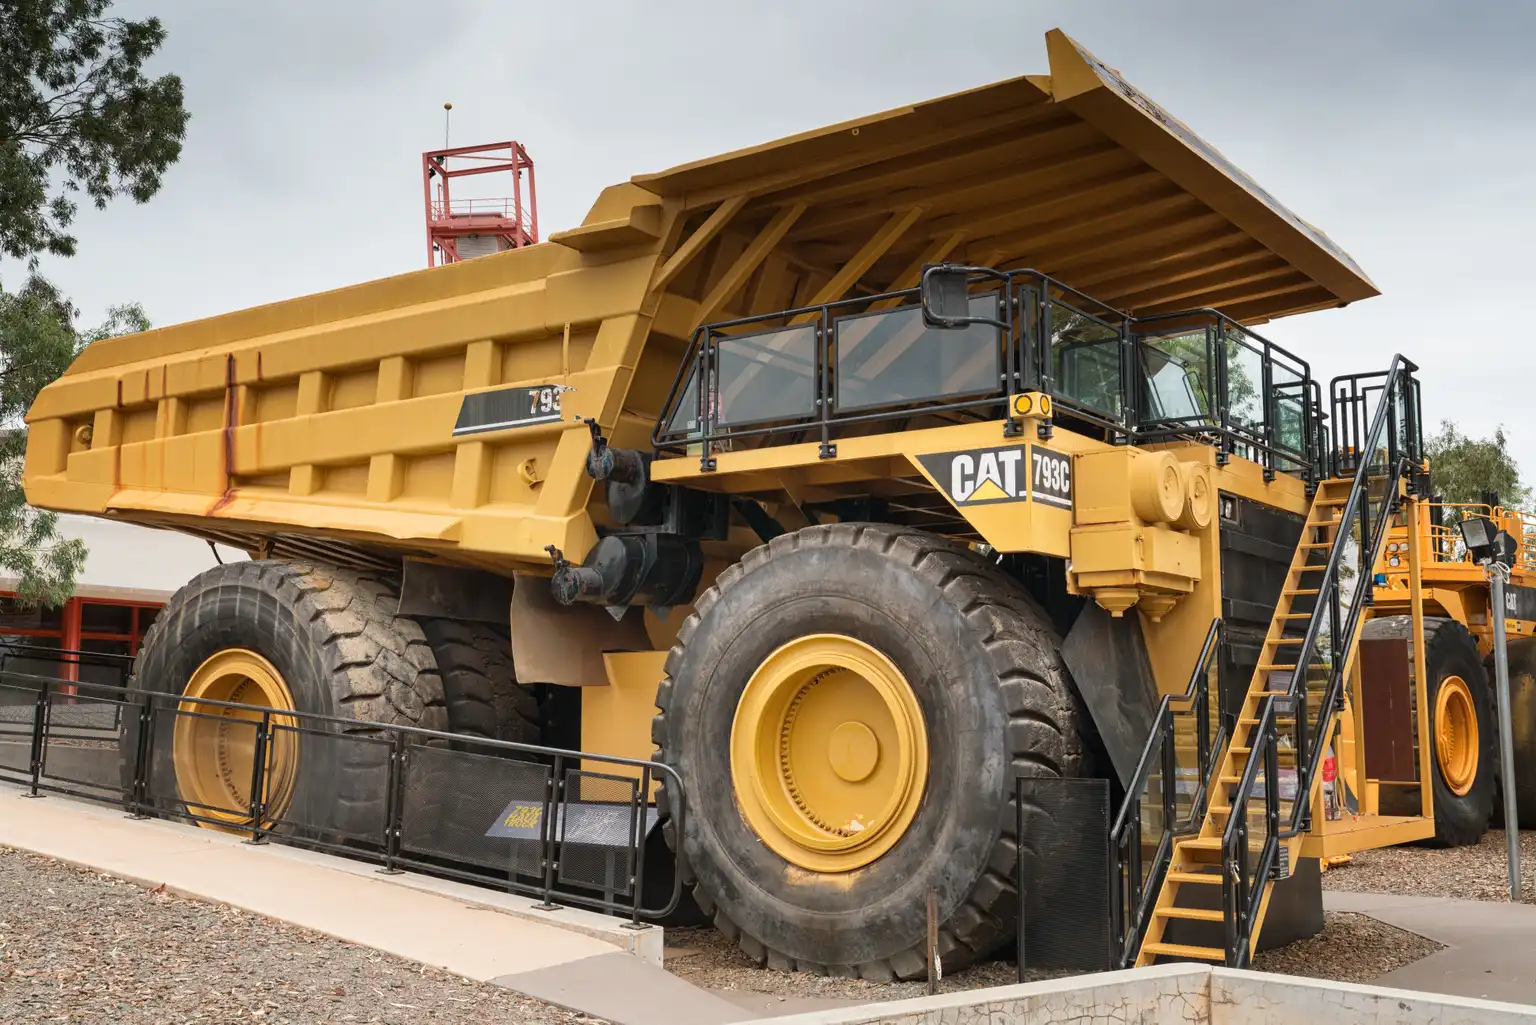 Caterpillar Stock Earnings: Can The Stock Keep Outperforming? - Seeking Alpha